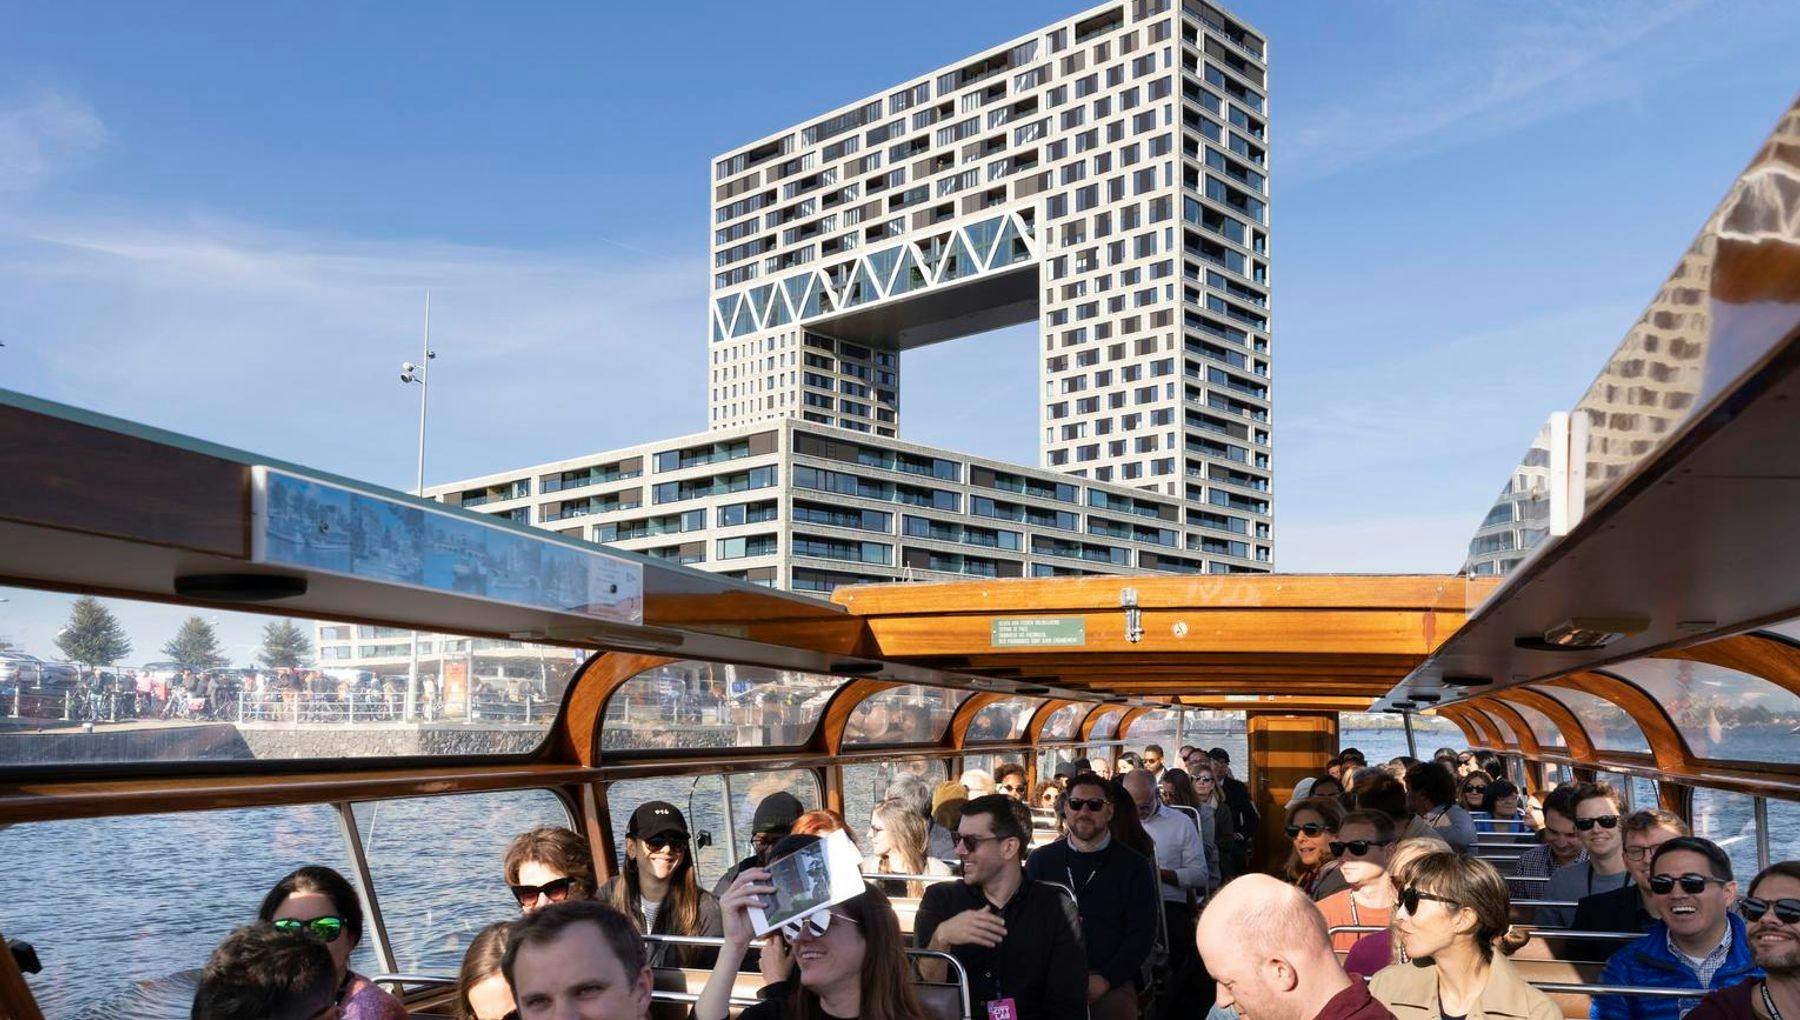 Canal Tour : How to Live Among Water - Field trip during Citylab event, in Amsterdam, Netherlands, on October 9, 2022.

Marlene Awaad / Bloomberg Philanthropies